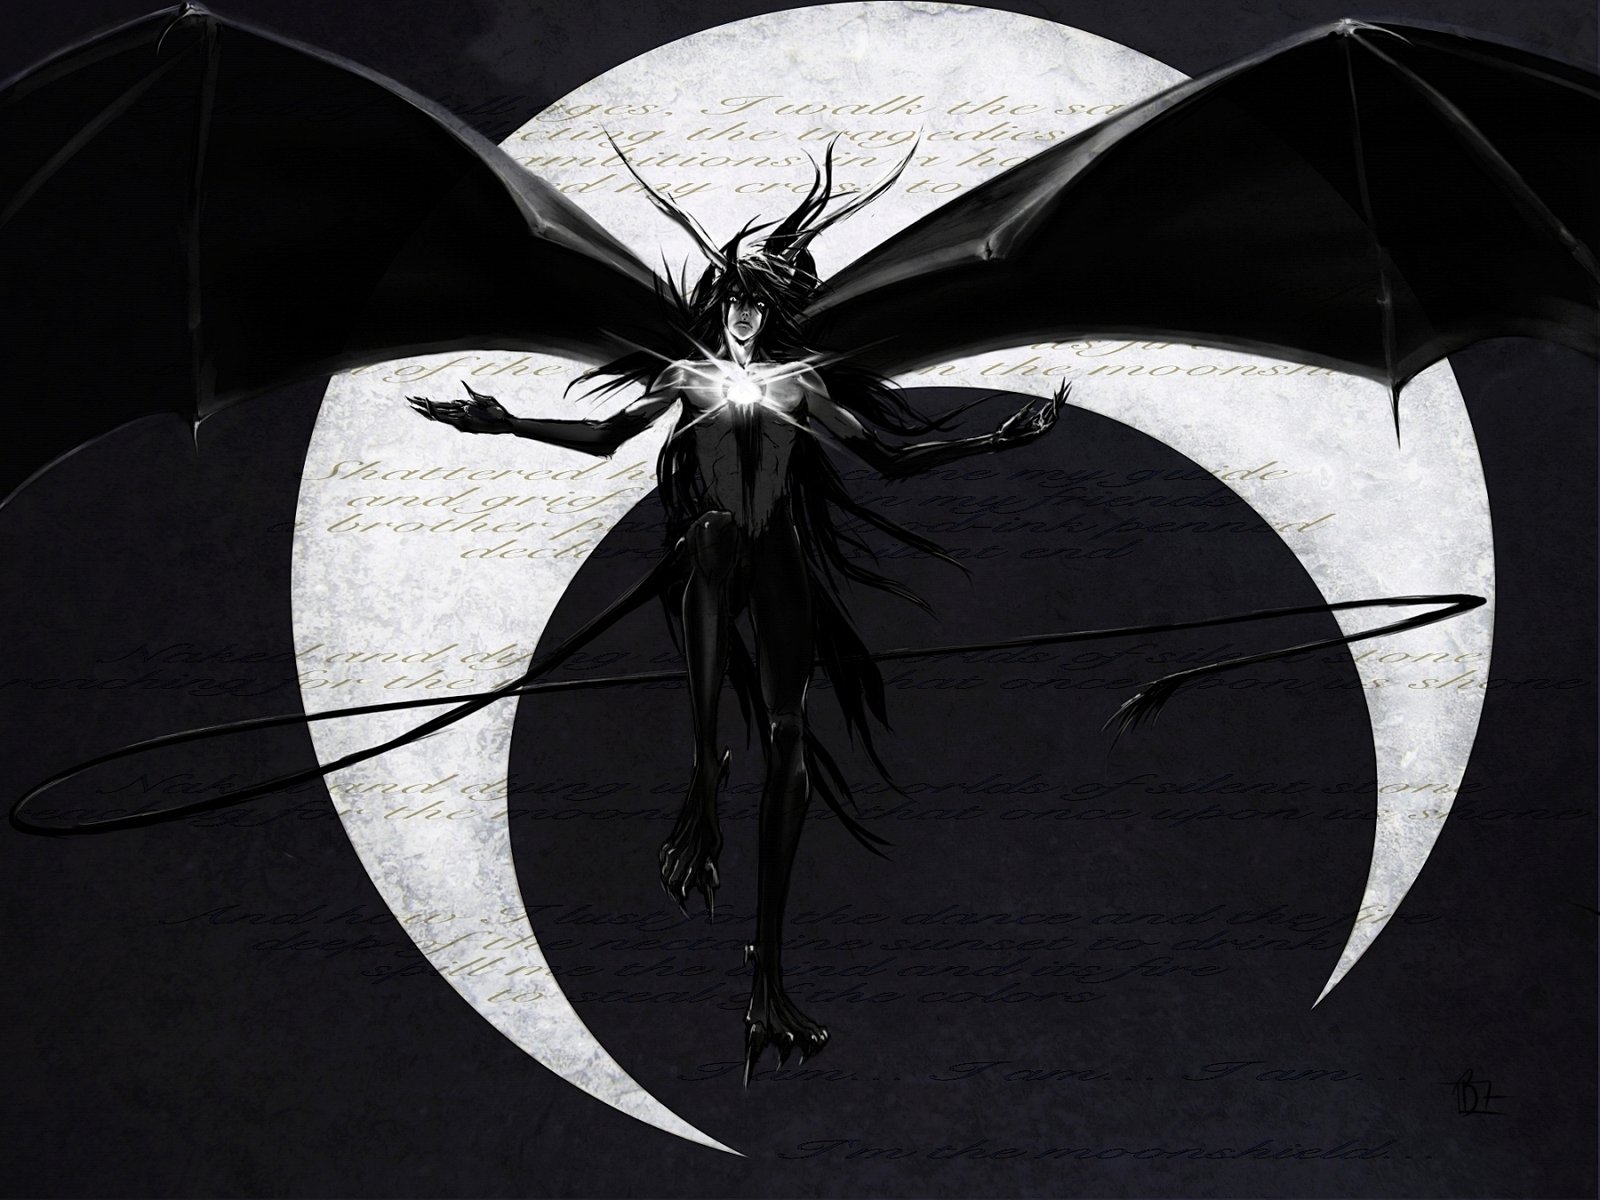 Ulquiorra Cifer 9 Fan Arts and Wallpapers | Your daily Anime Wallpaper ...